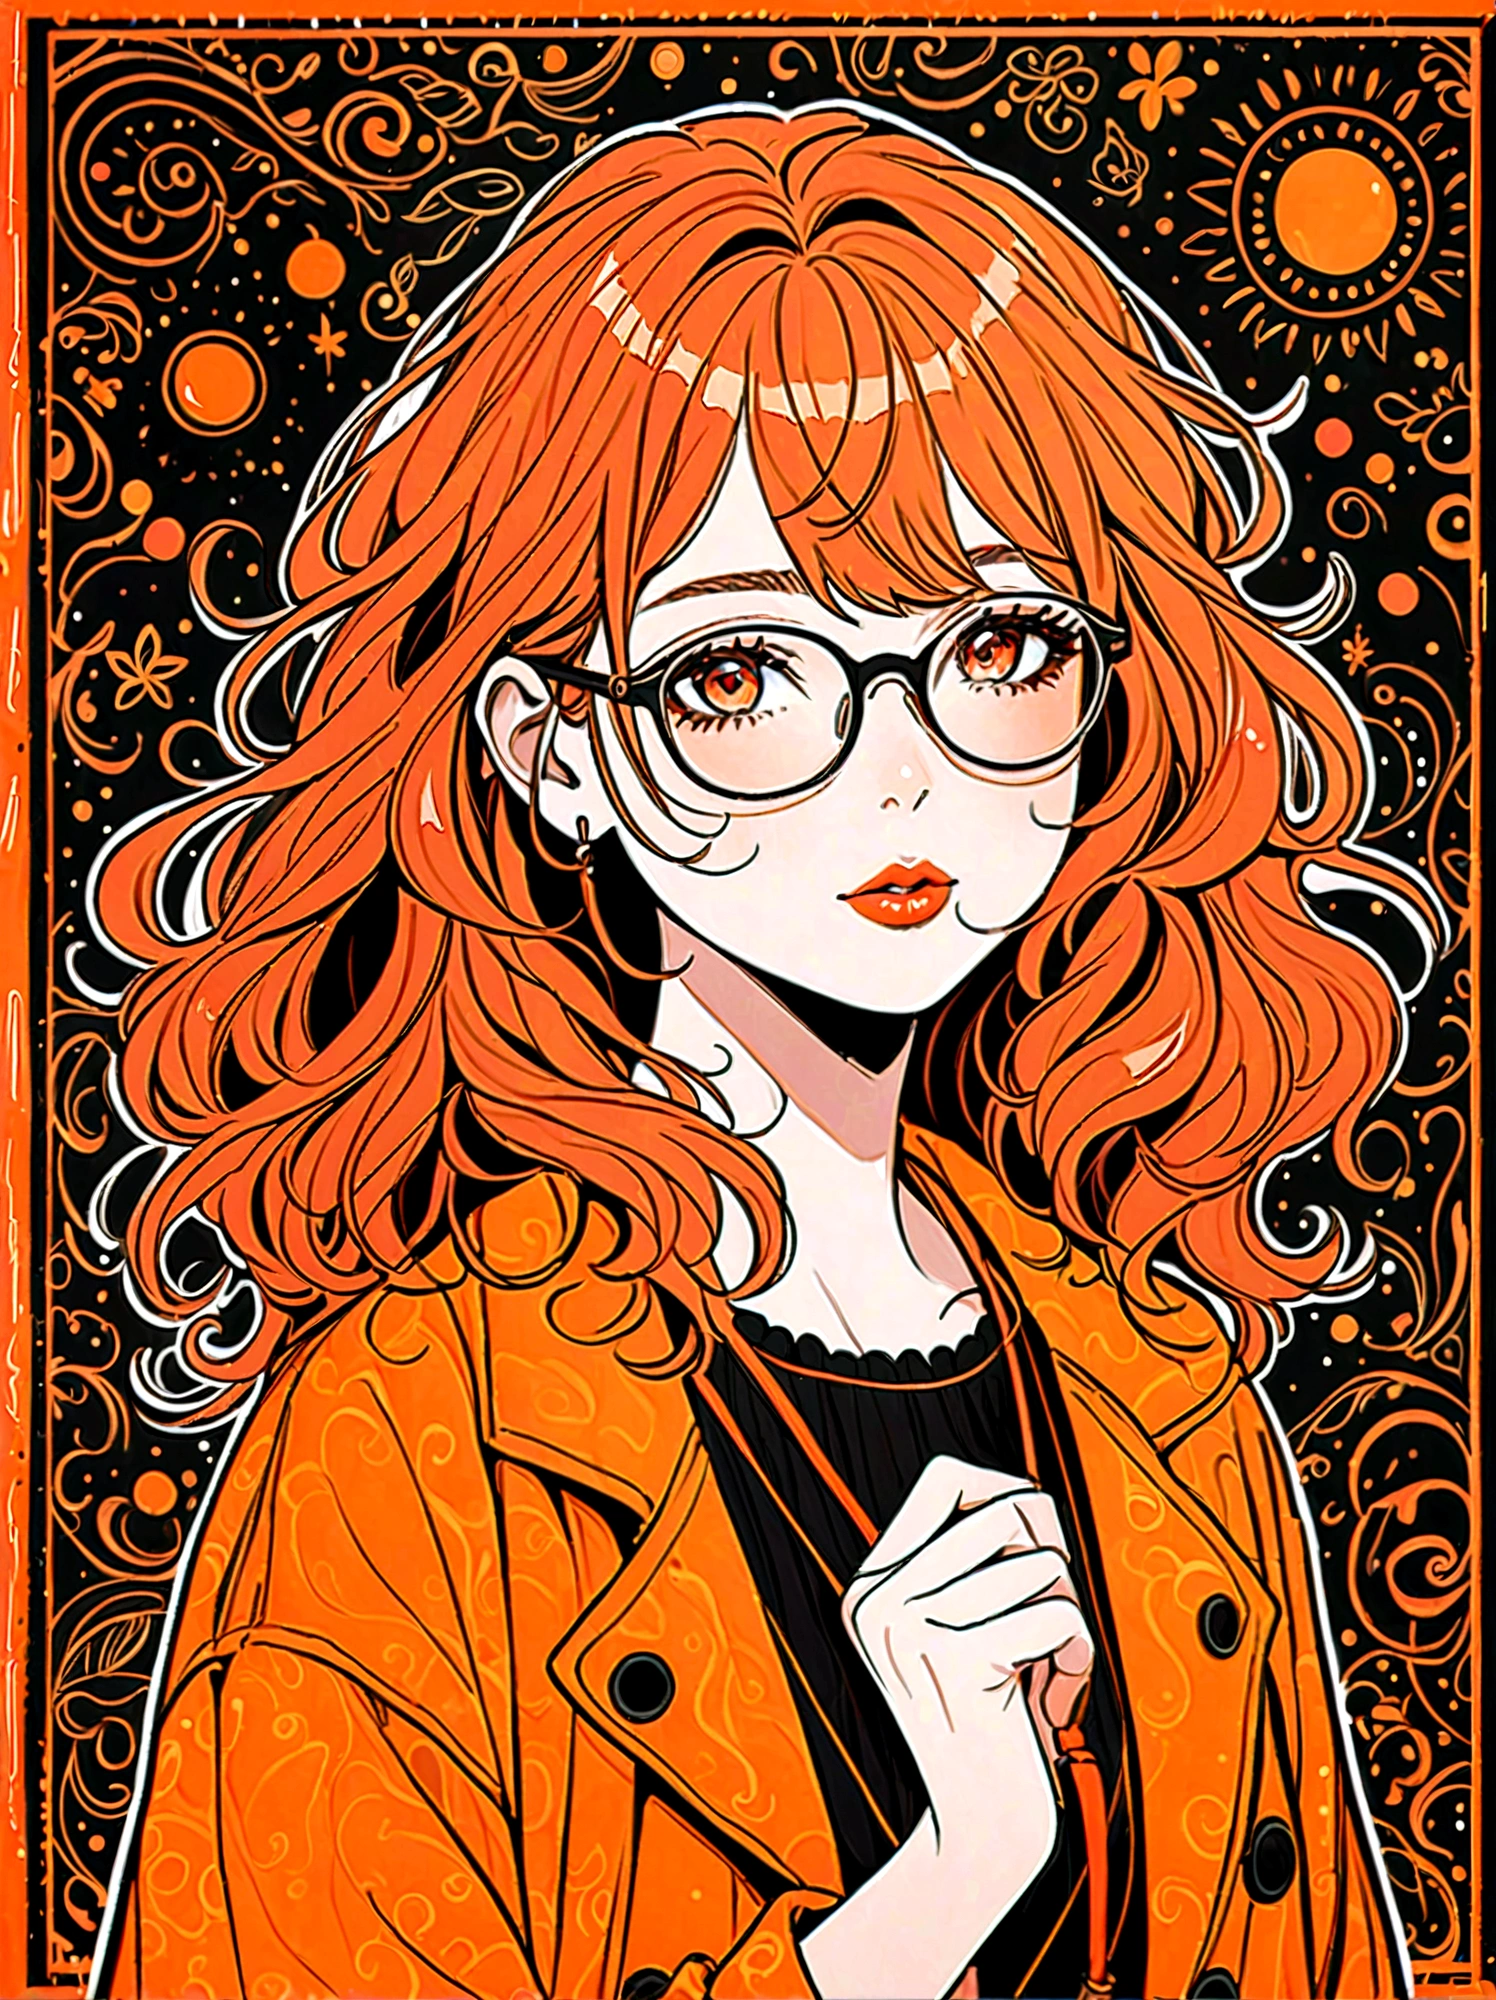 (masterpiece, best quality:1.2), Cartoon hand drawn, 1girl, solo, wear glasses, Rouge, messy hair, The color palette is in red, orange and black tones and has a sketchy style. The background should have a simple hand-drawn doodle pattern, 1shxx1